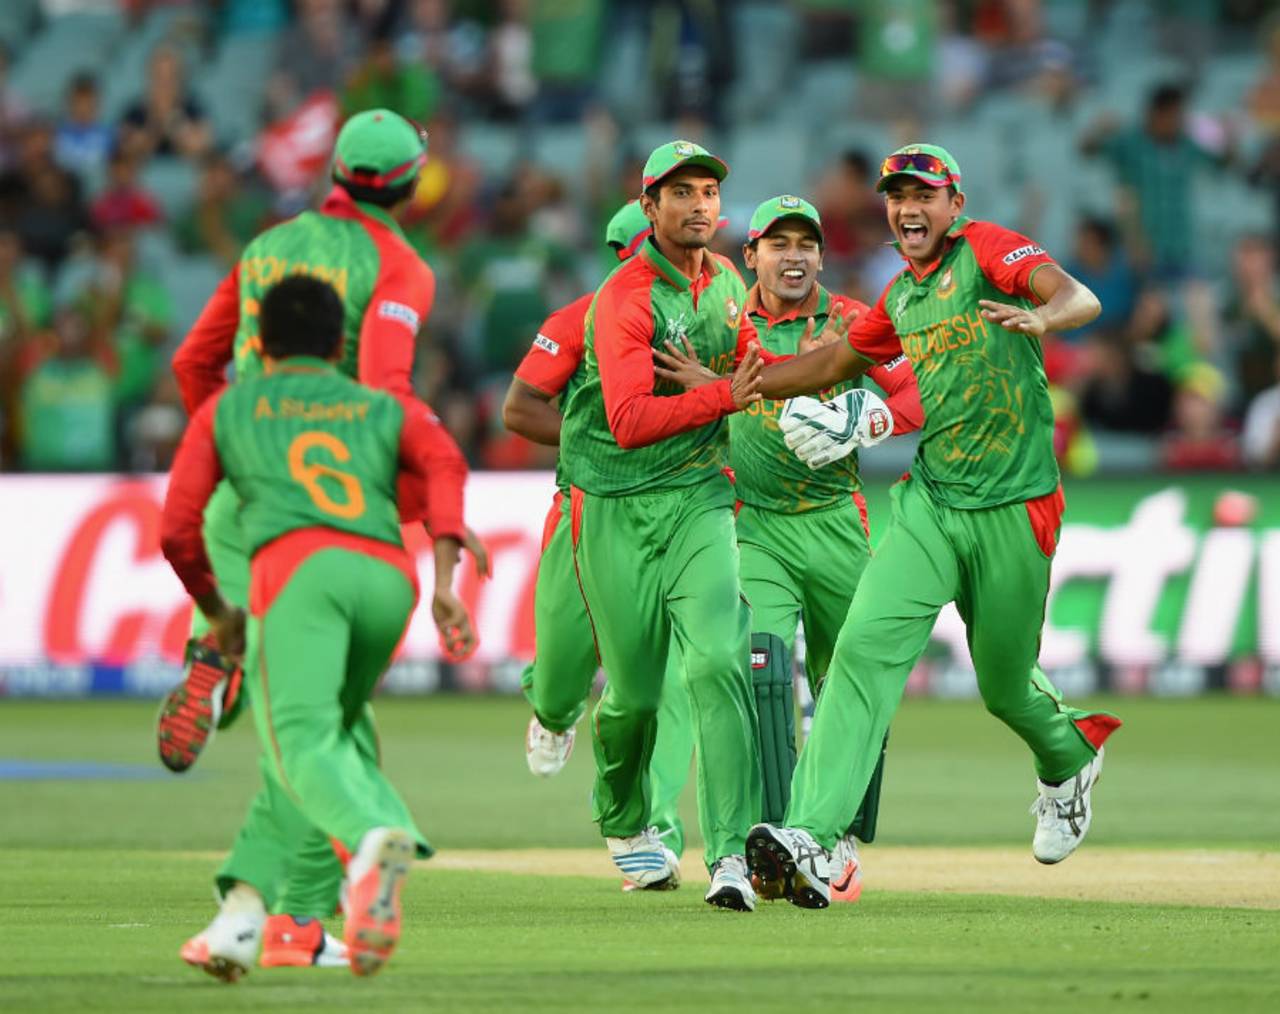 Bangladesh players celebrate after the run out of Moeen Ali, England v Bangladesh, World Cup 2015, Group A, Adelaide, March 9, 2015